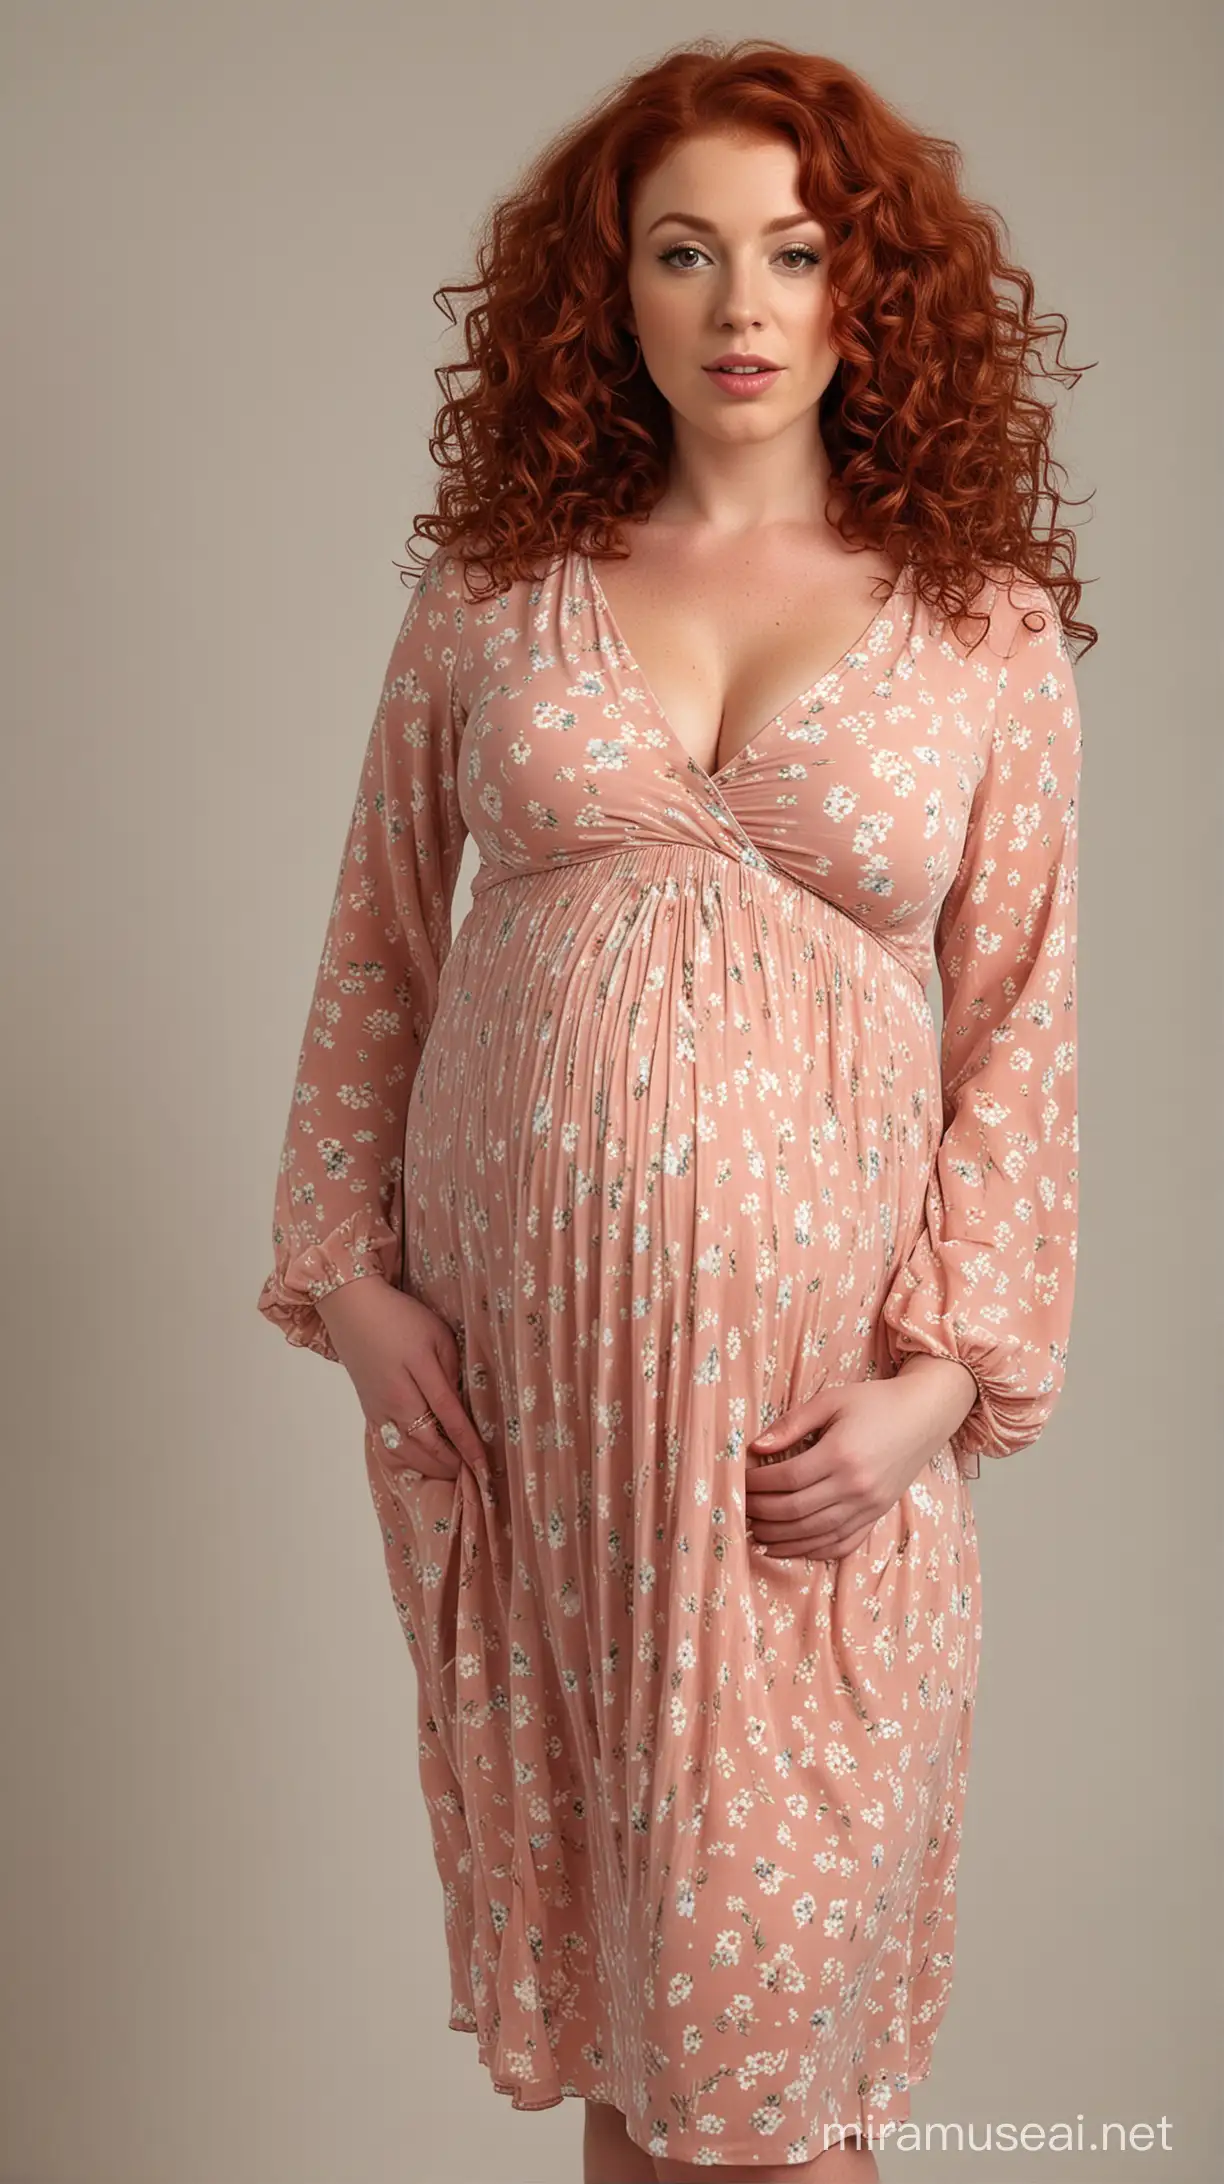 The Sexiest, most beautiful, soft, curviest, large hips, plump lips, maternity model, the largest breasts, the longest volumized blowout Irish curly red hair in a new mother hair style. Clothing Style: super soft feminine. Wearing a summer maternity dress, 9 months pregnant. Facing the viewer, full body view. Show at age 30